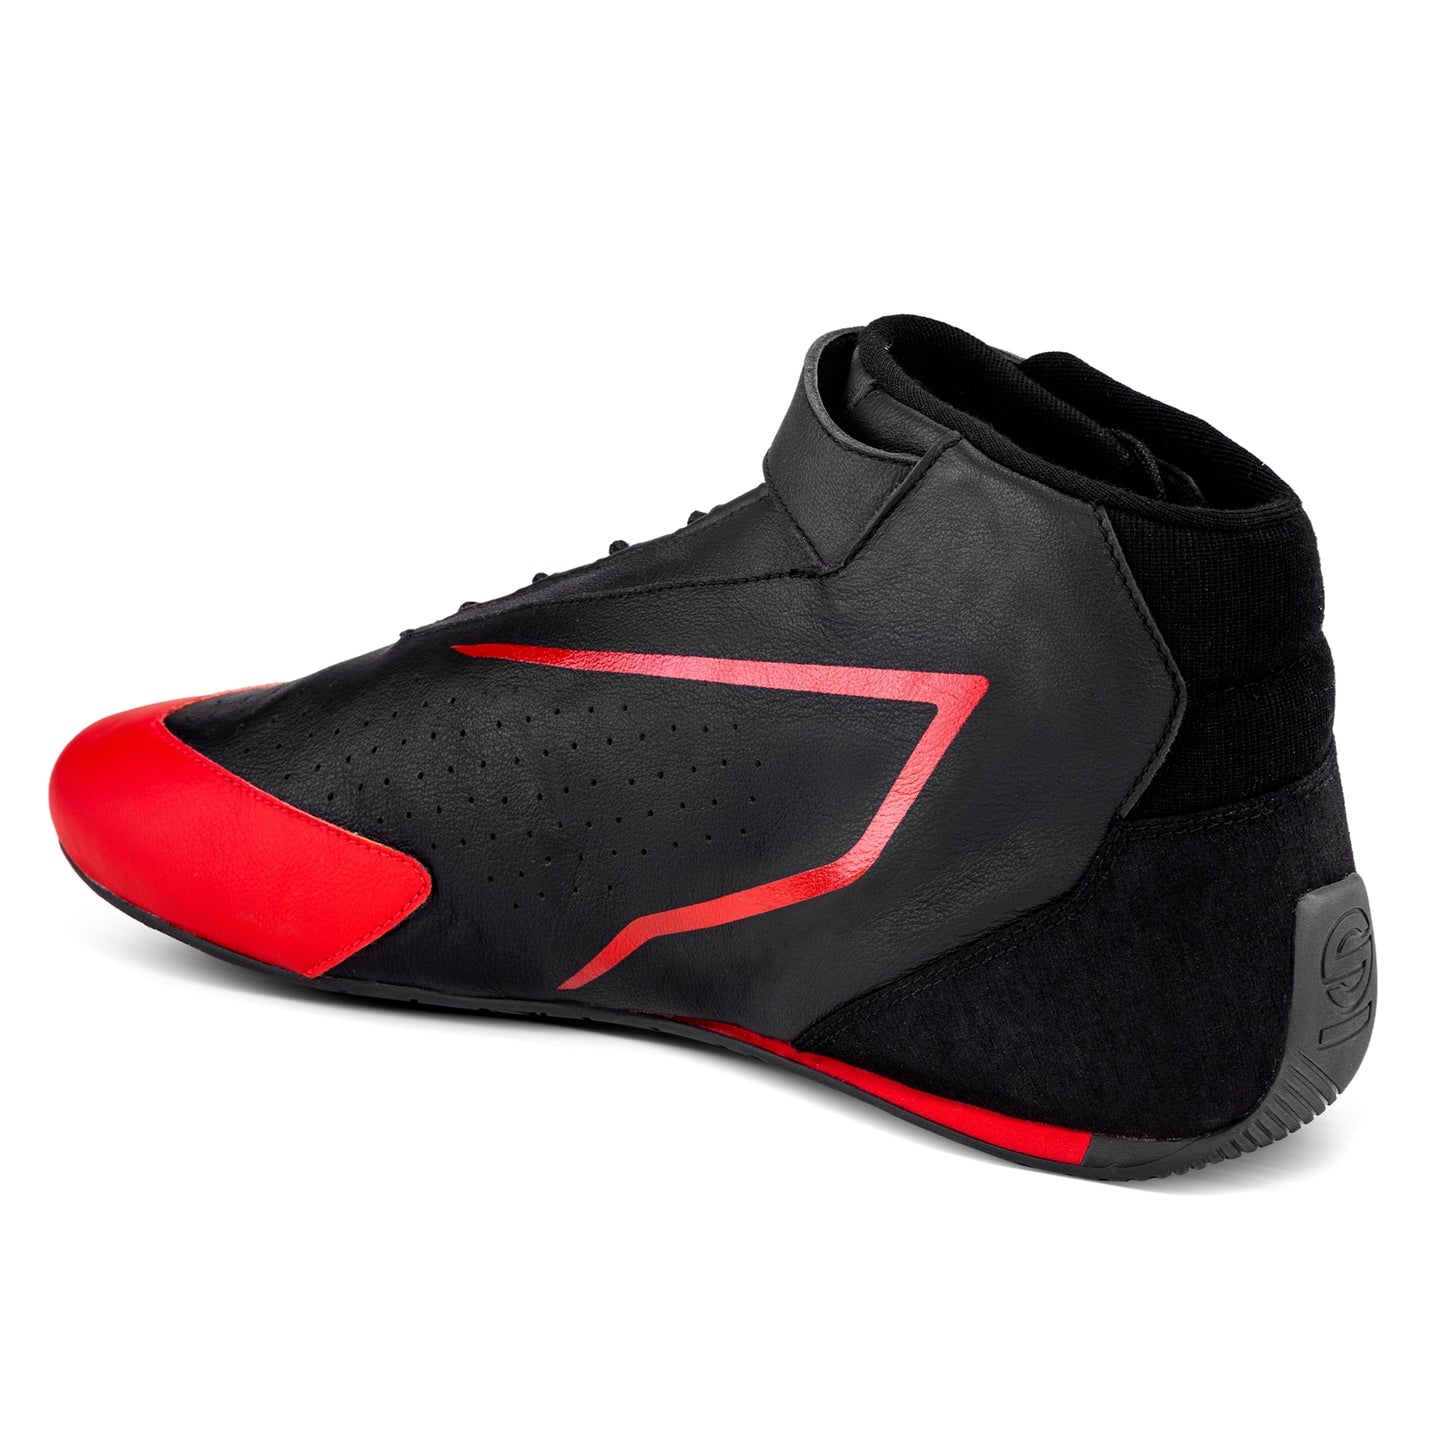 Sparco Skid Shoe